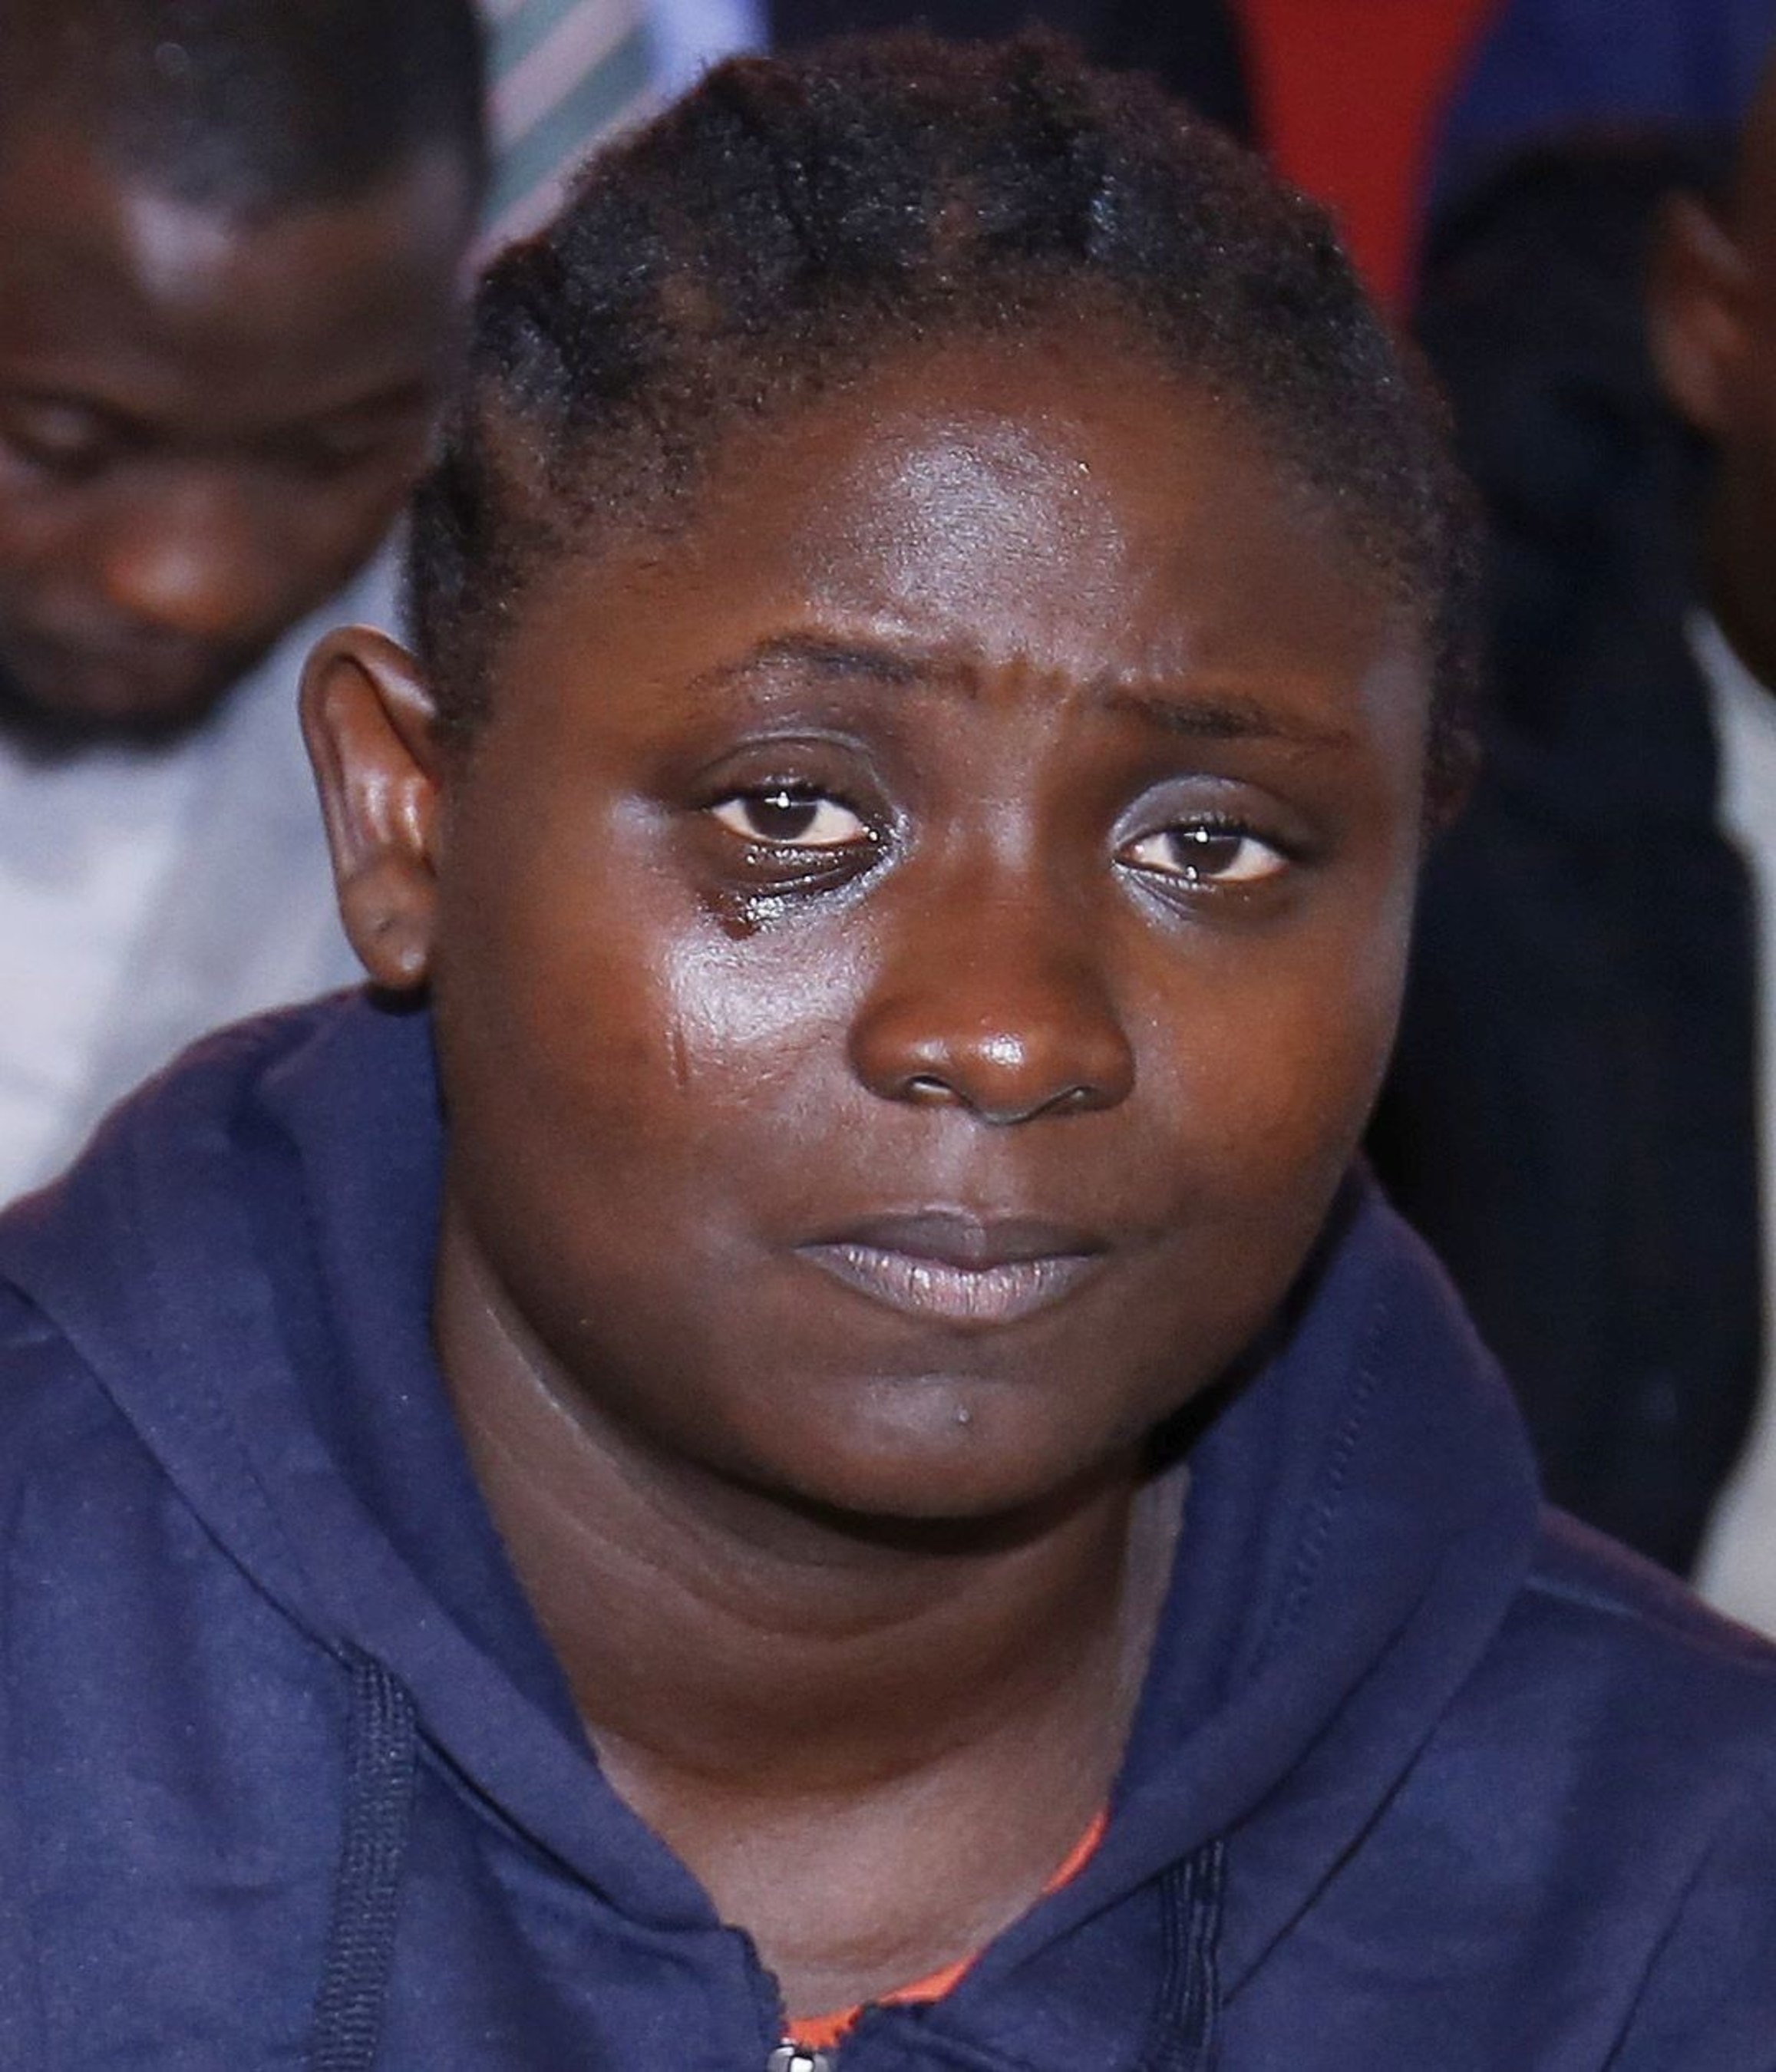 One of the deportee's sheds tears after receiving her own portion of the N10,000,000 ($33,000) gift presented to the group after they came to The Synagogue, Church Of All Nations to seek refuge. They are the fourth group of deportees who have received help from the church in 2016. (PRNewsFoto/Emmanuel TV)